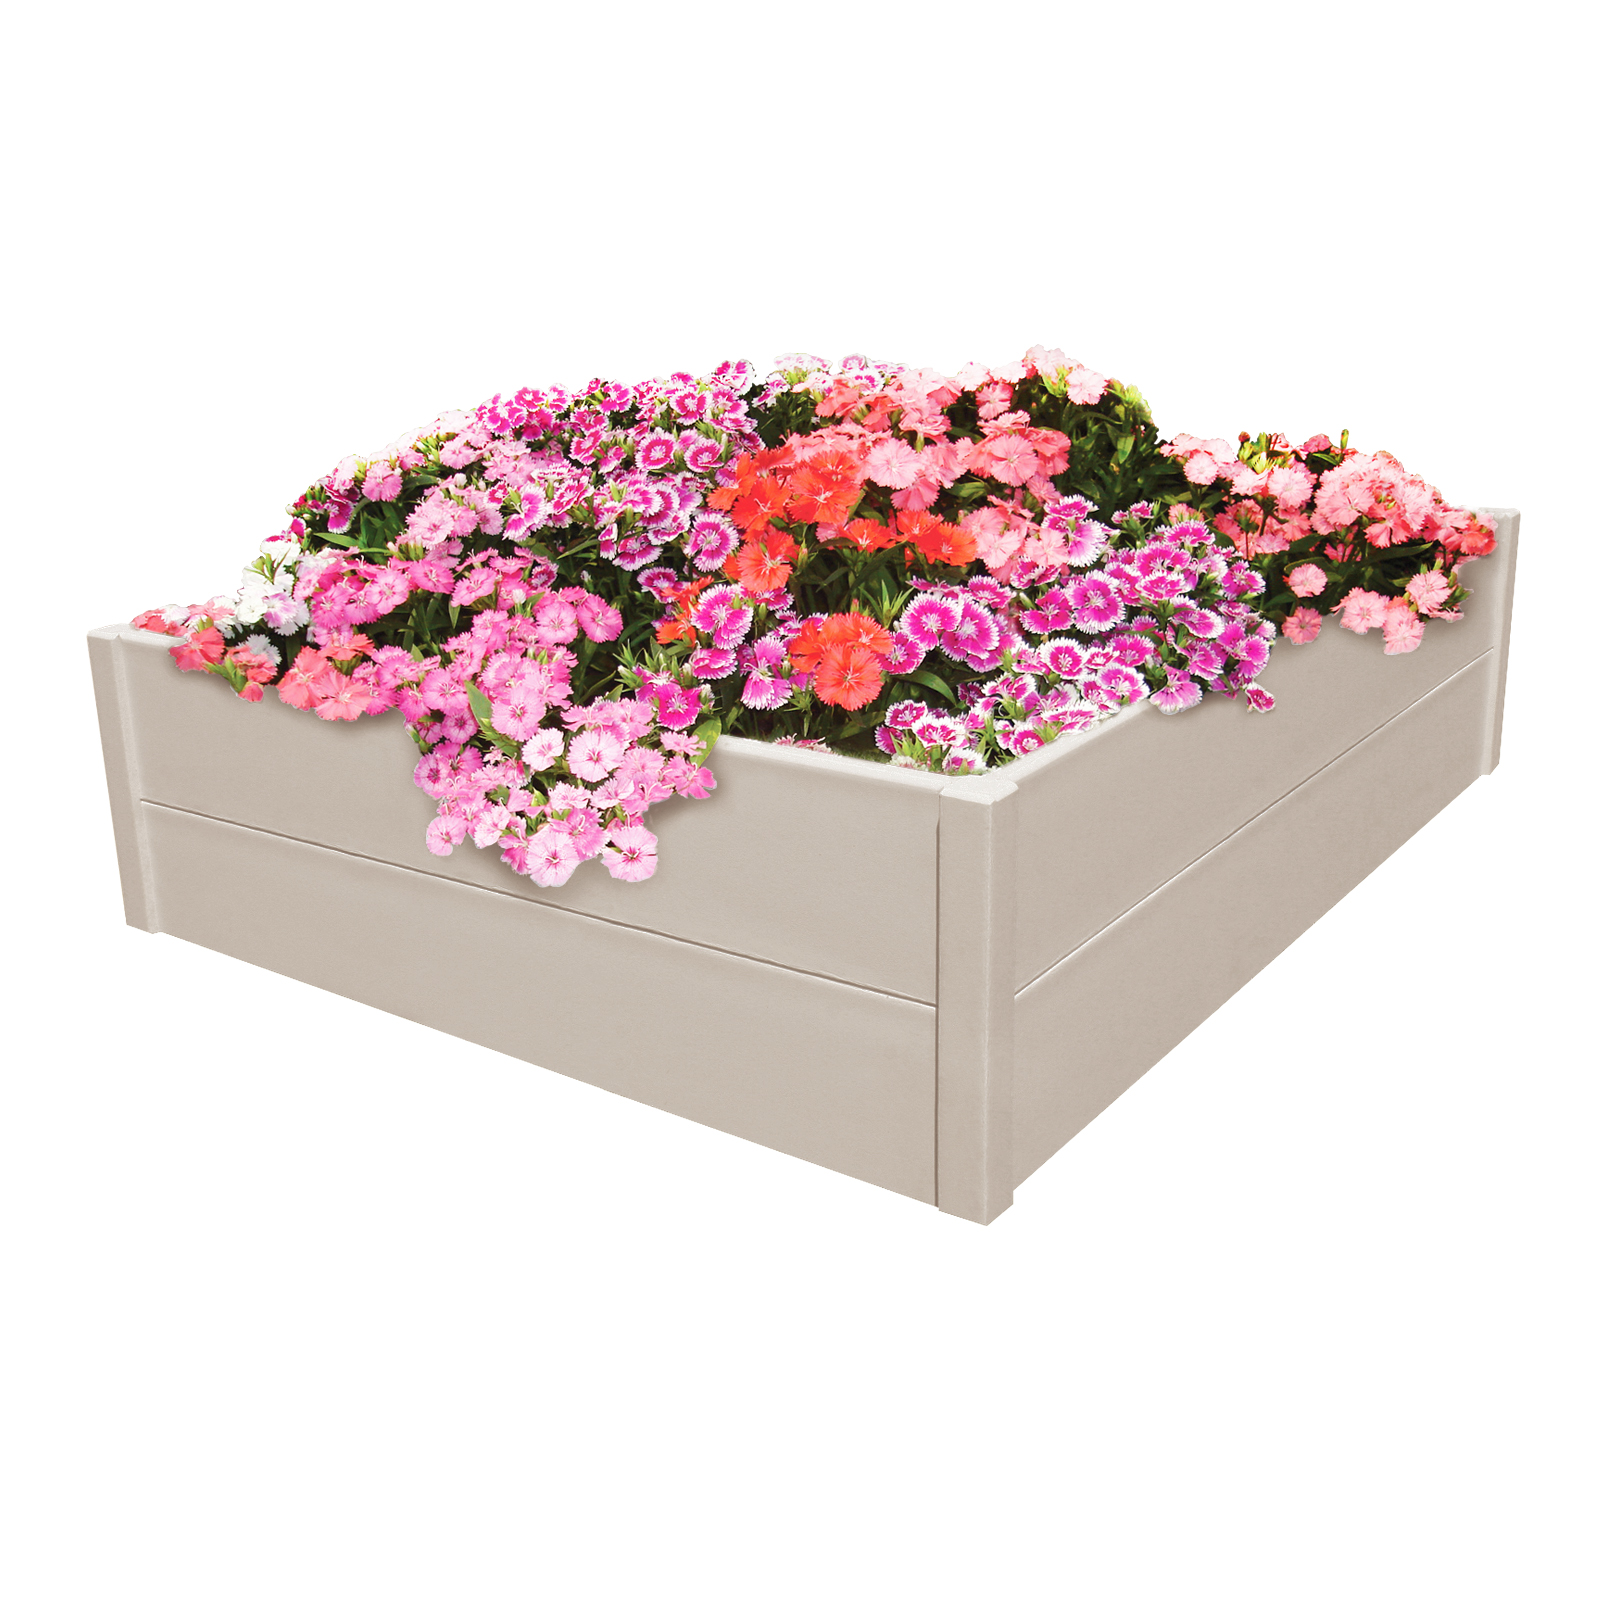 Raised Garden and Sand Commercial Grade Box 2 Tier, Driftwood